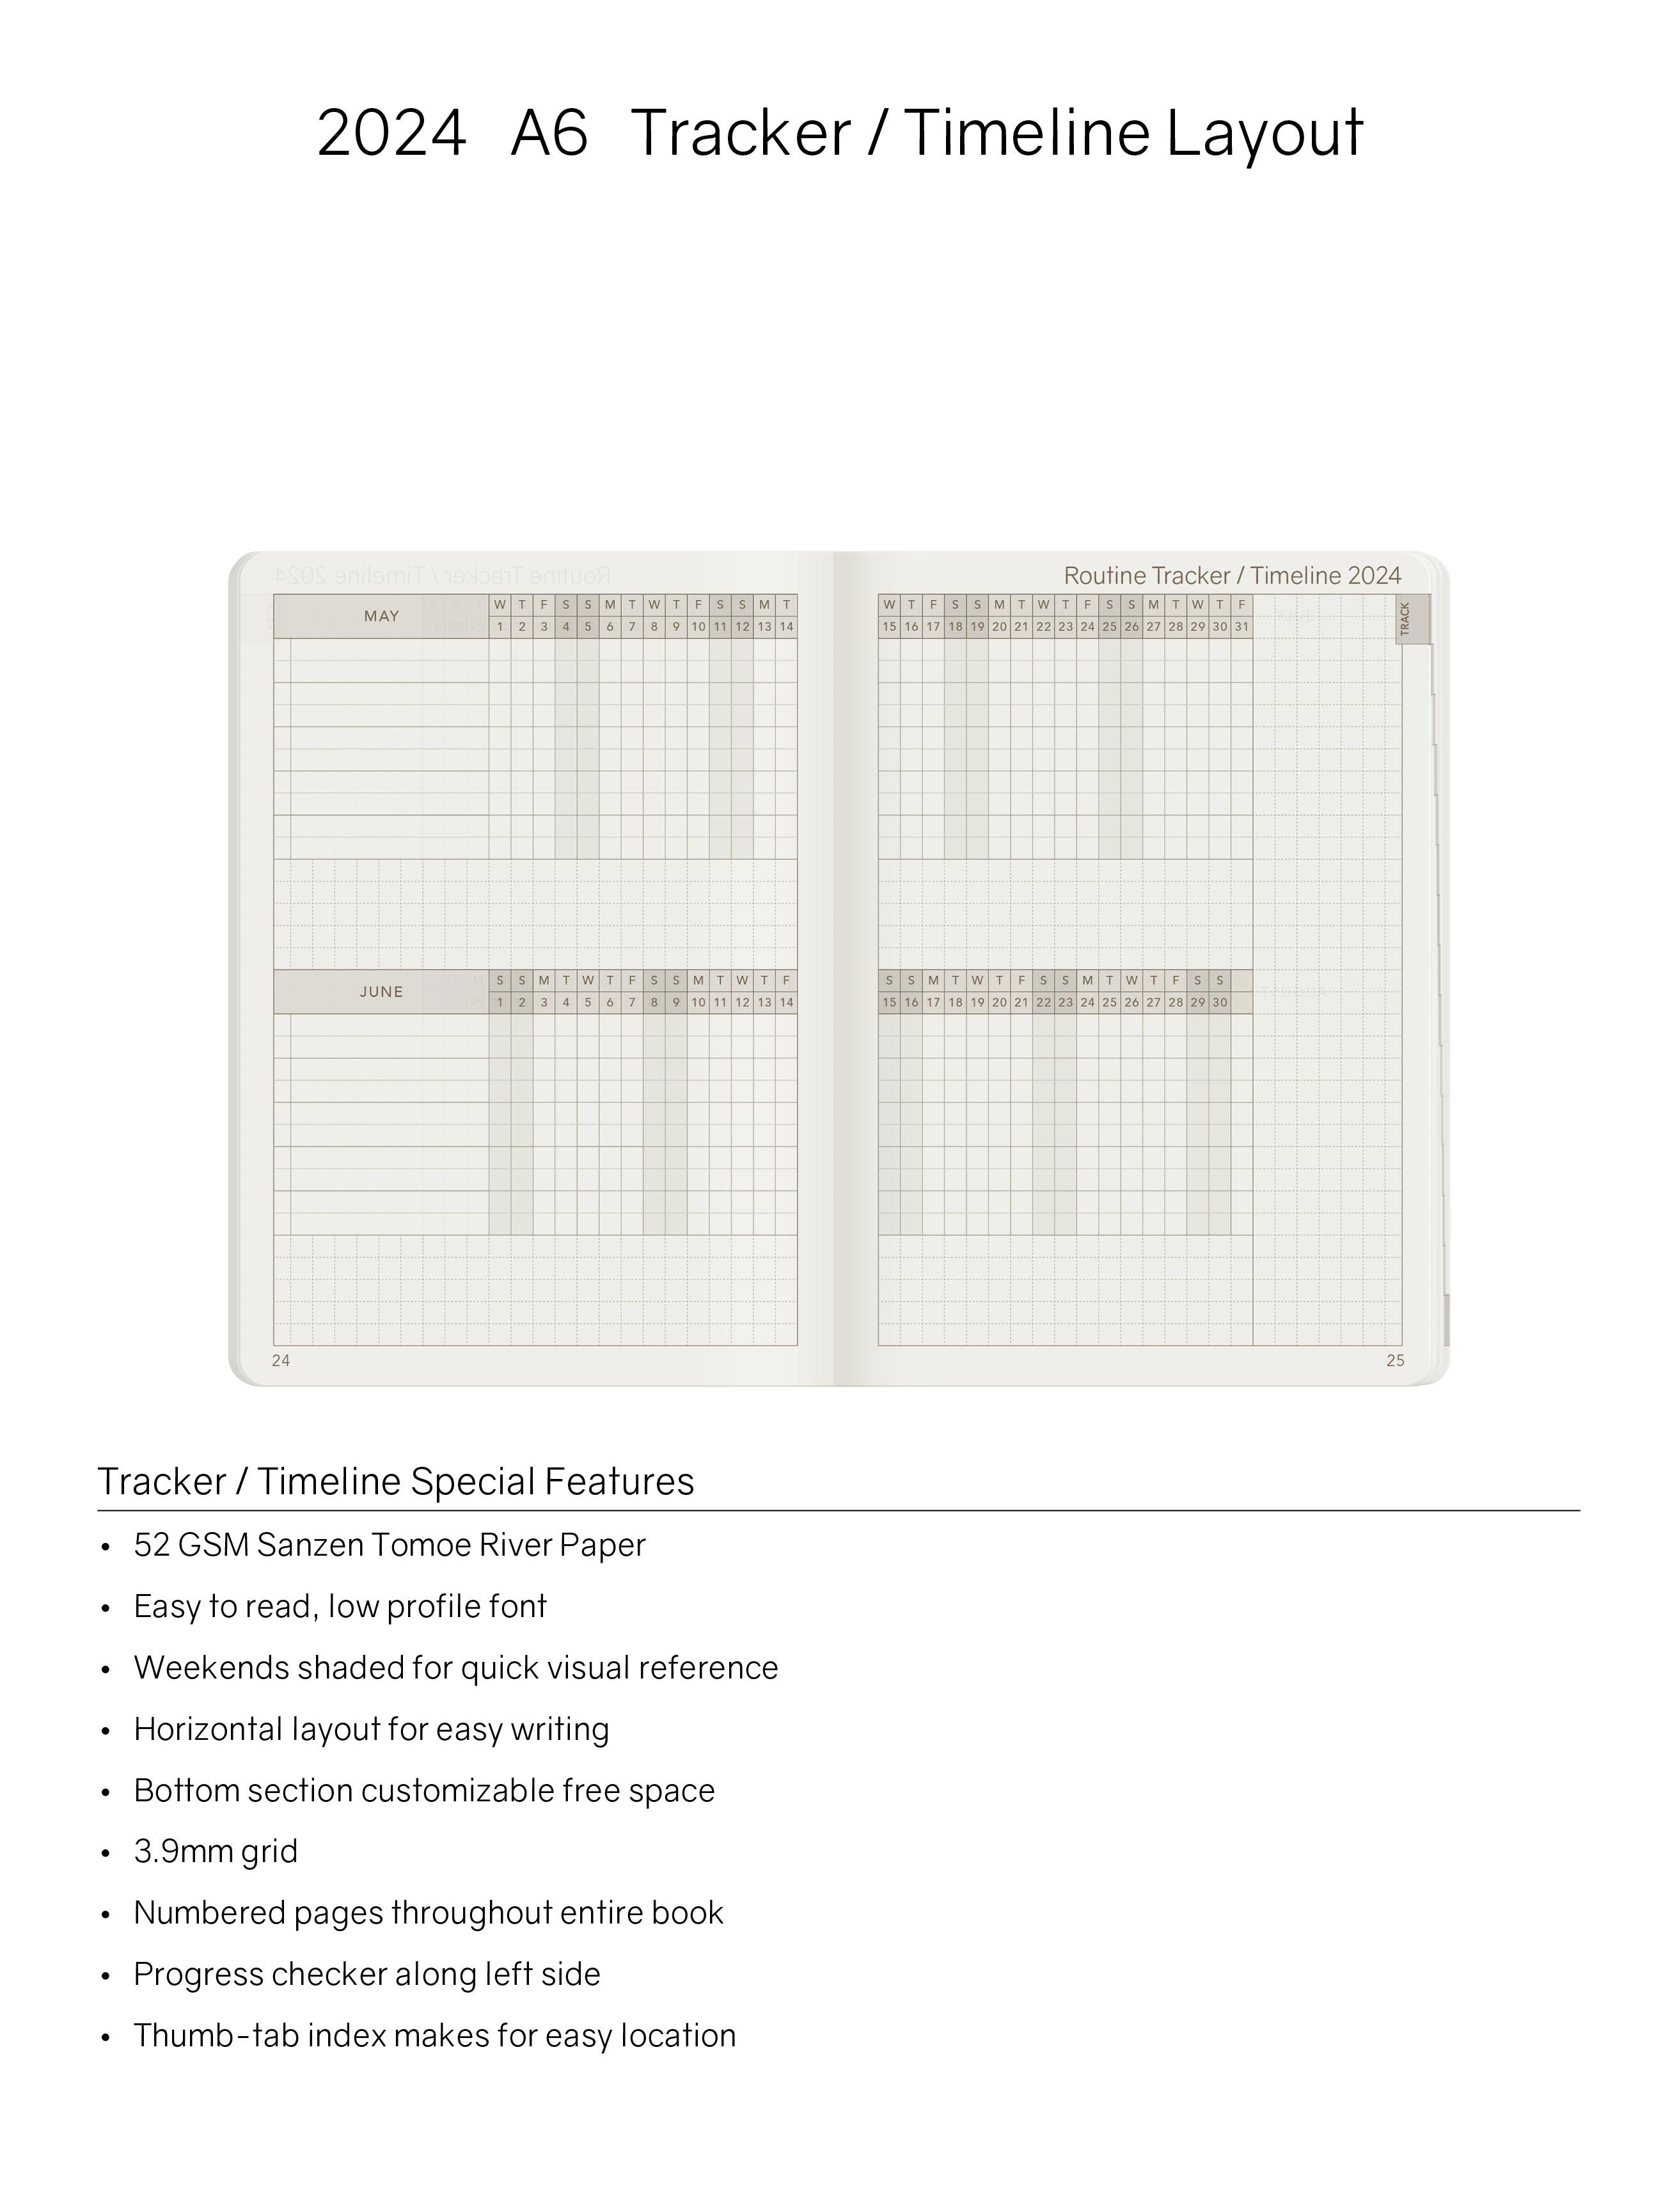 2024 A6 Weekly Planner - Midnight Sky (Black) - 52gsm Tomoe River Paper (Stacked Weekends)